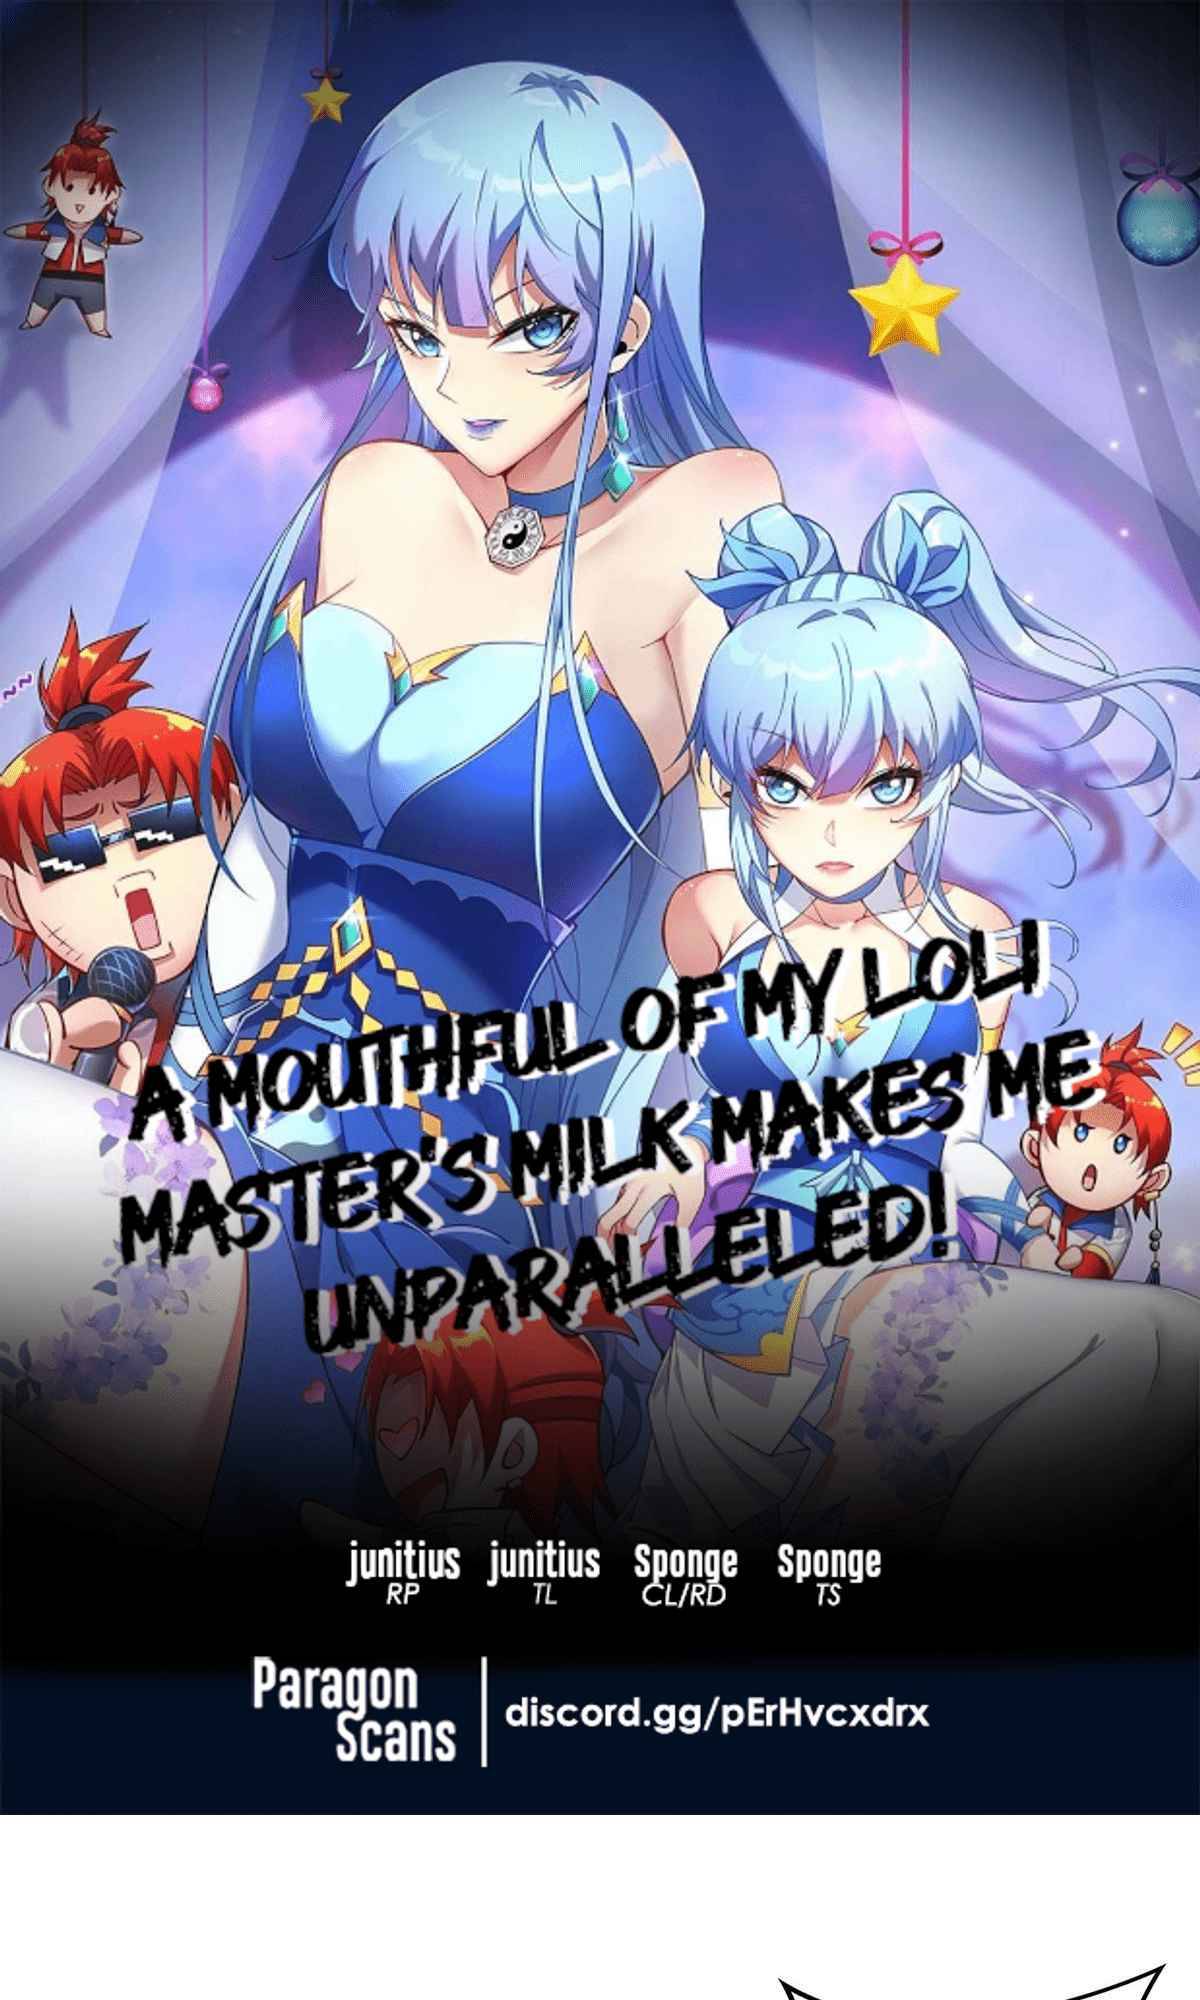 A Mouthful of My L0li Master's Milk Makes Me Unparalleled - chapter 15 - #1